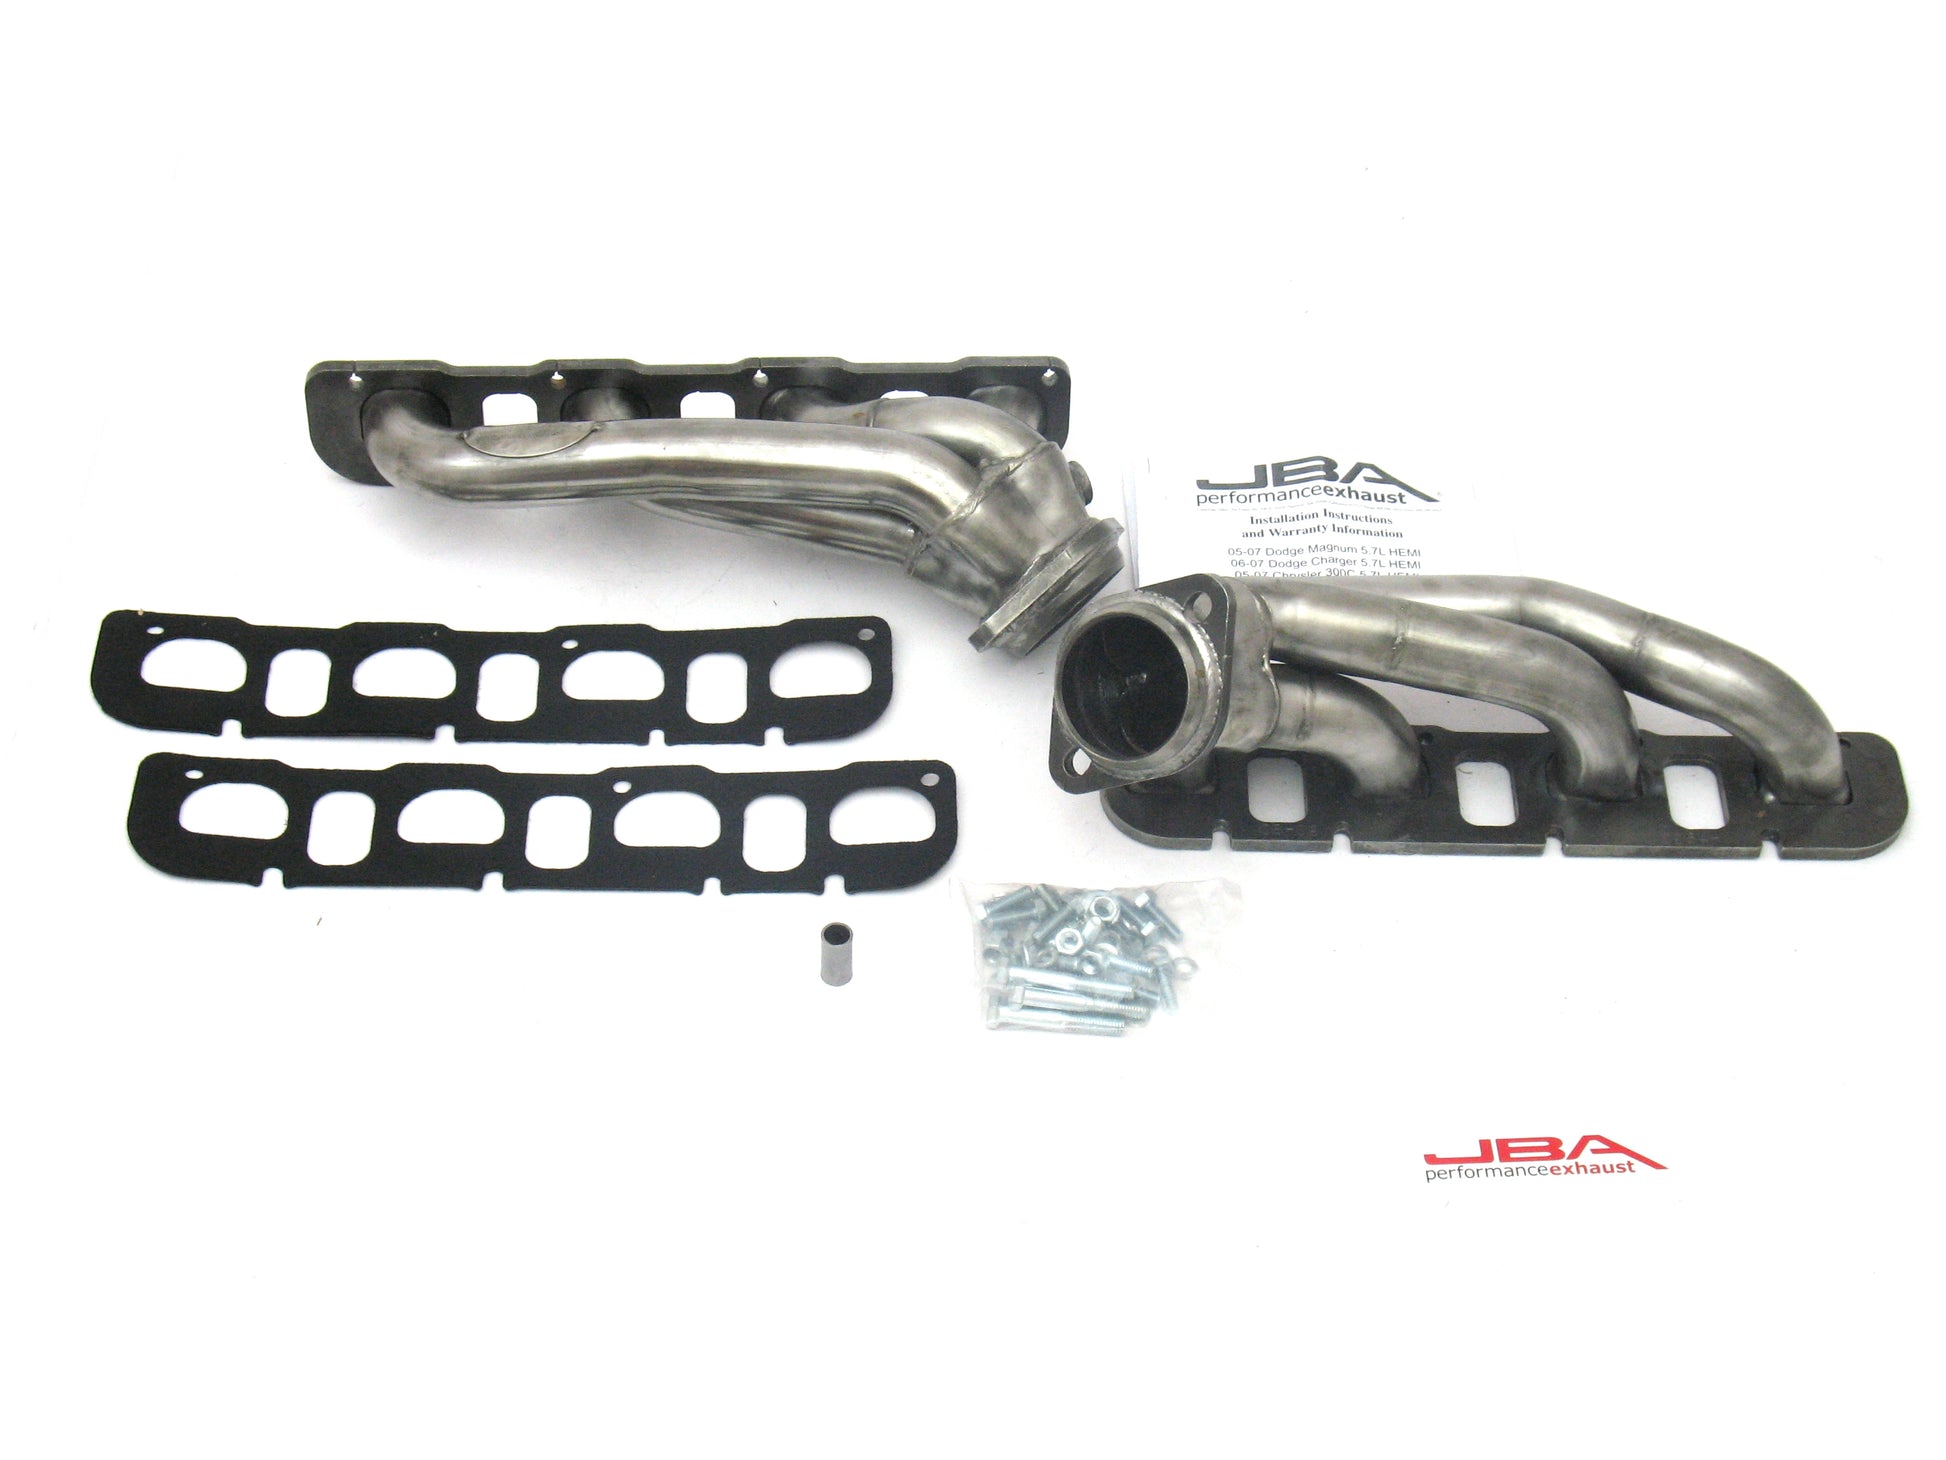 JBA Performance Exhaust 1964S 1 3/4" Header Shorty Stainless Steel 05-08 Dodge Magnum/Charger/300C 5.7L